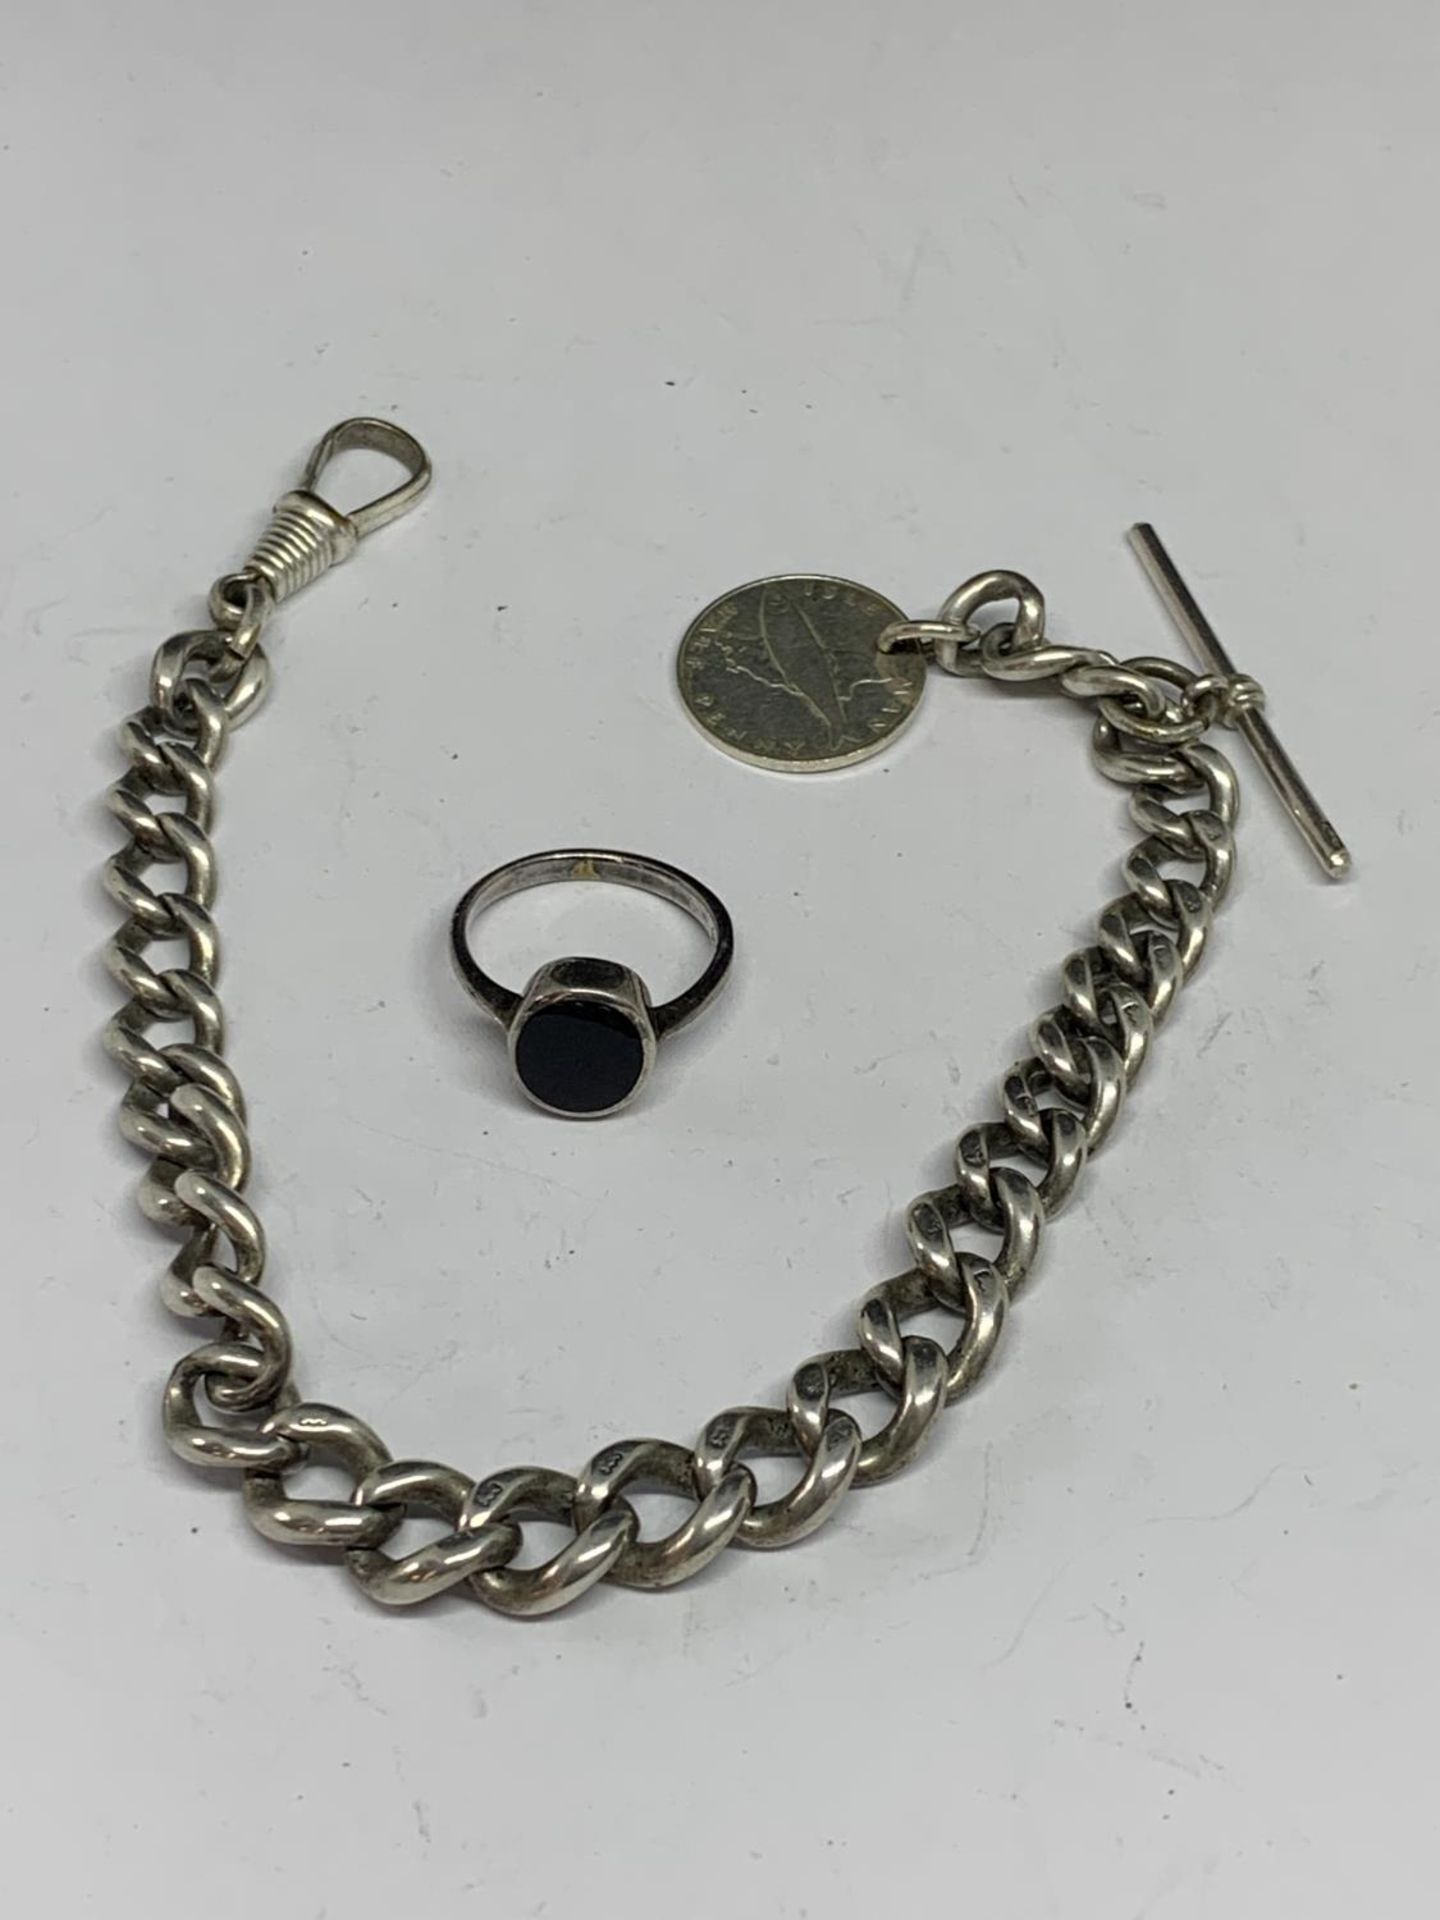 A HEAVY SILVER HALF ALBERT WATCH CHAIN WITH A 1976 ISLE OF MAN HALF PENNY AND A SILVER RING WITH